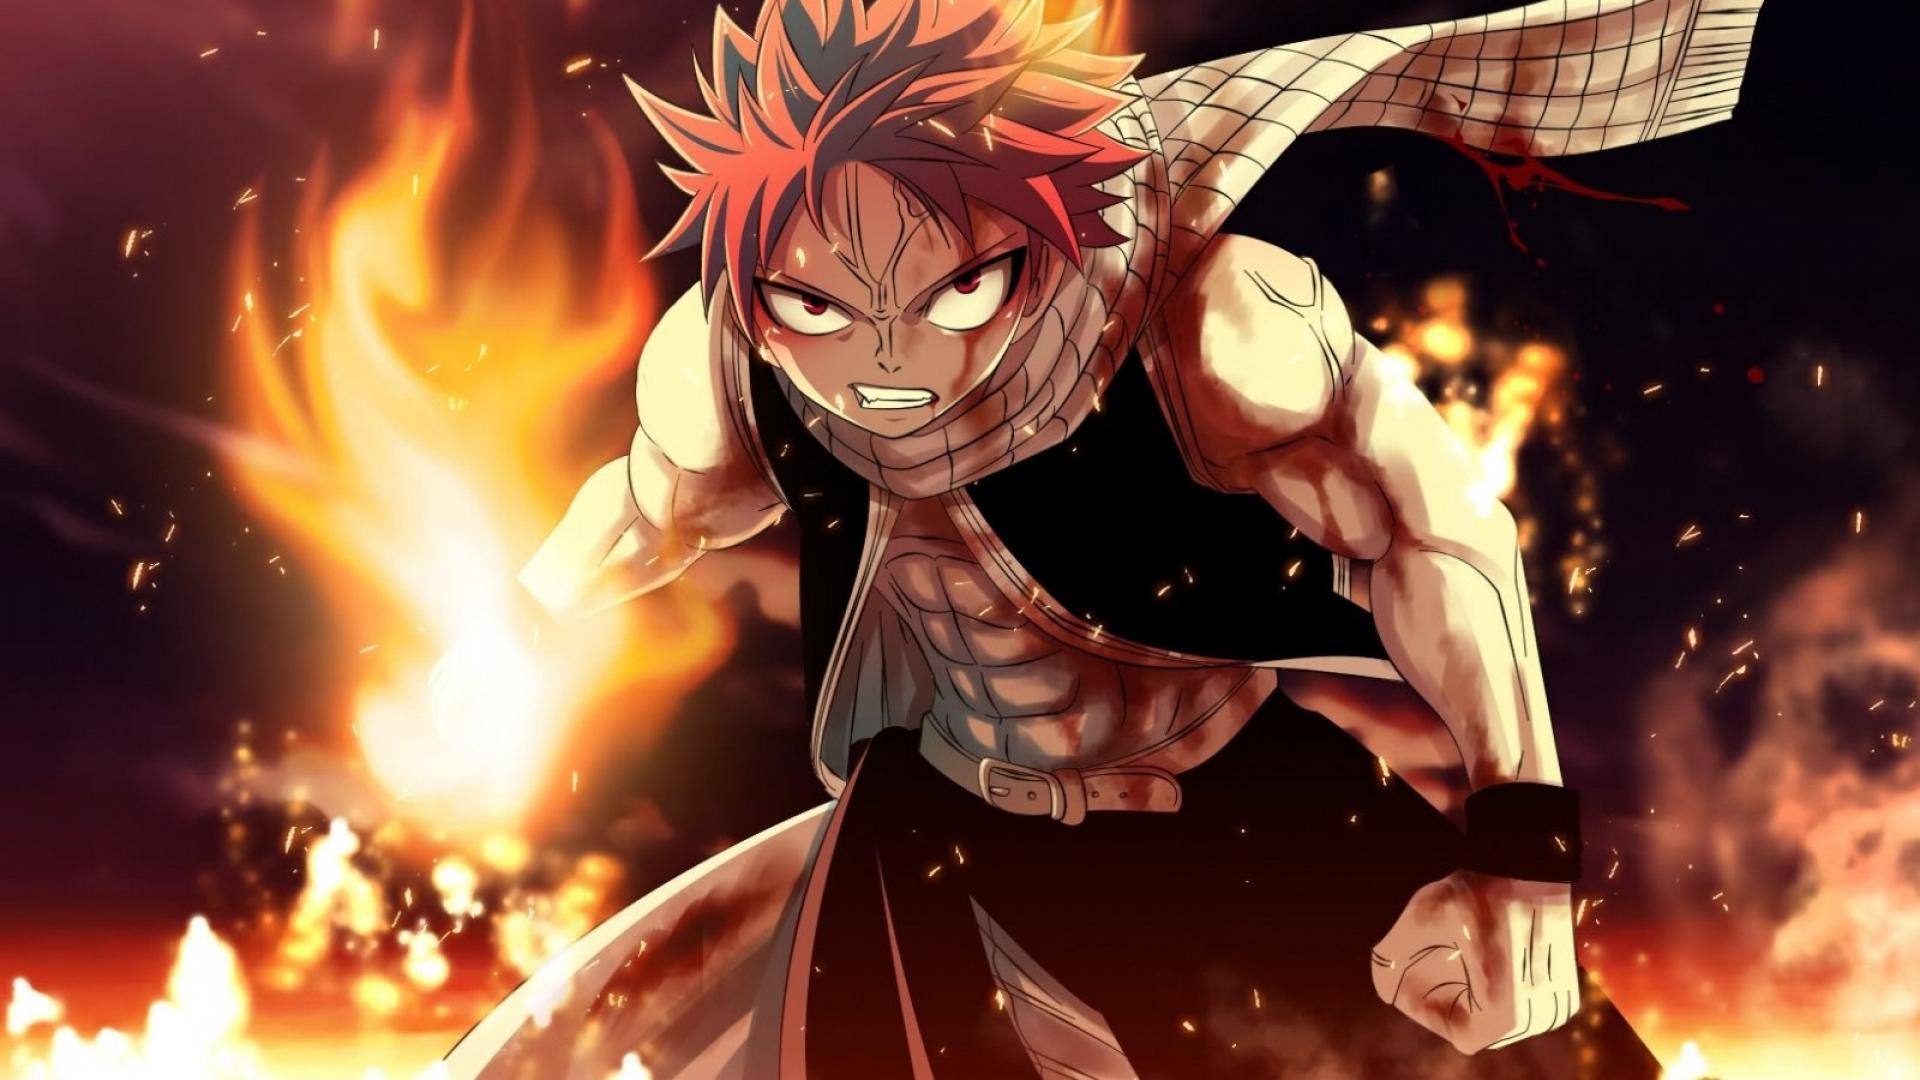 Fairy Tail 2015 Wallpapers HD - Wallpaper Cave